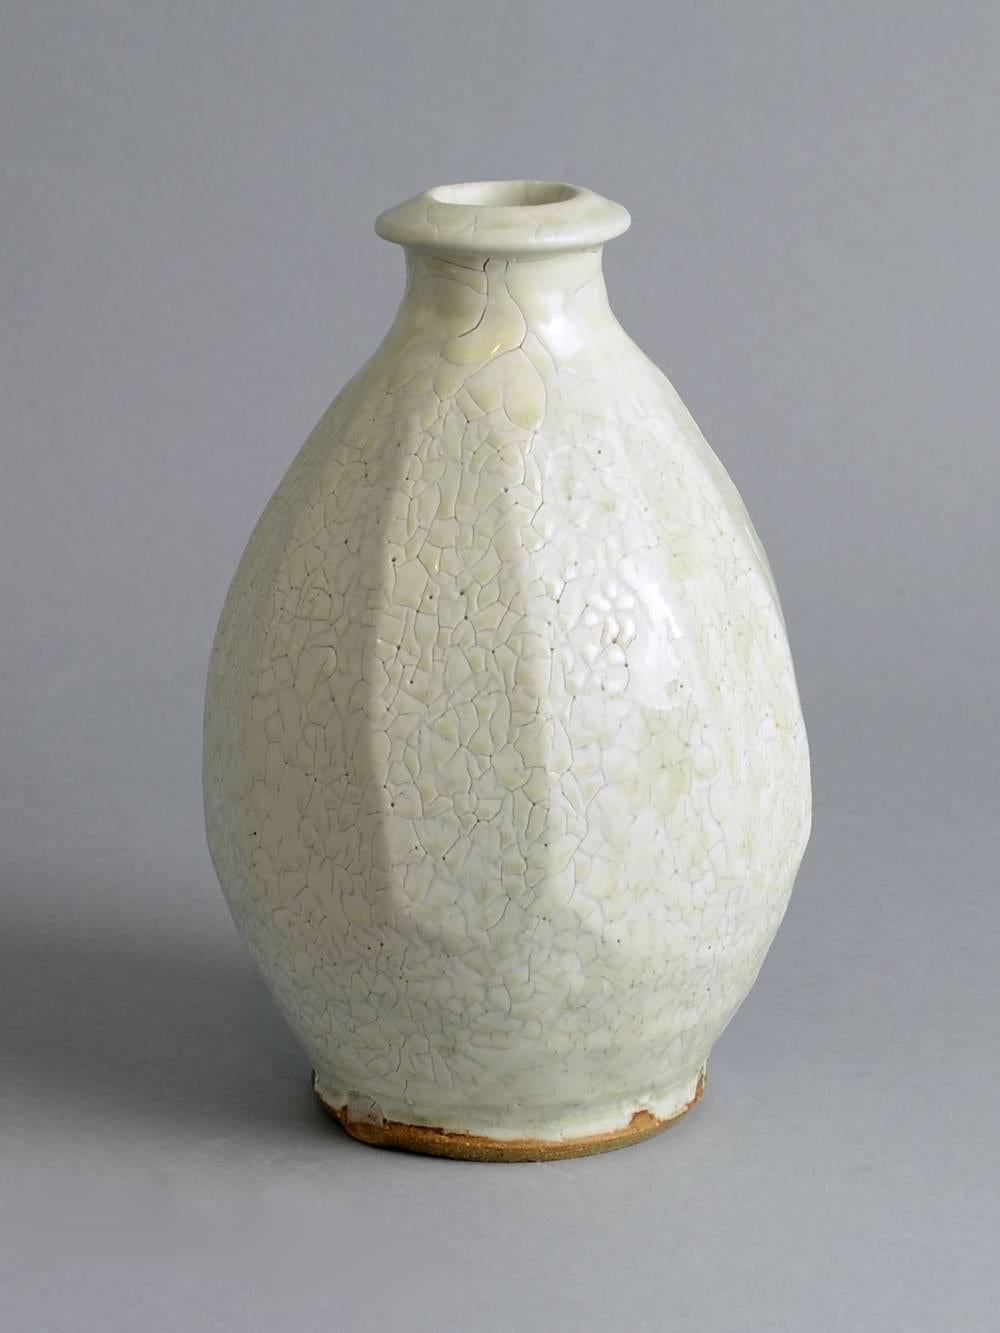 Mike Dodd, own studio, UK.
Unique stoneware vase with glossy off-white glaze.
Measures: Height 9" (22.5cm), width 6" (15cm).
Impressed MD in square.
Excellent condition, no chips, cracks or repairs.